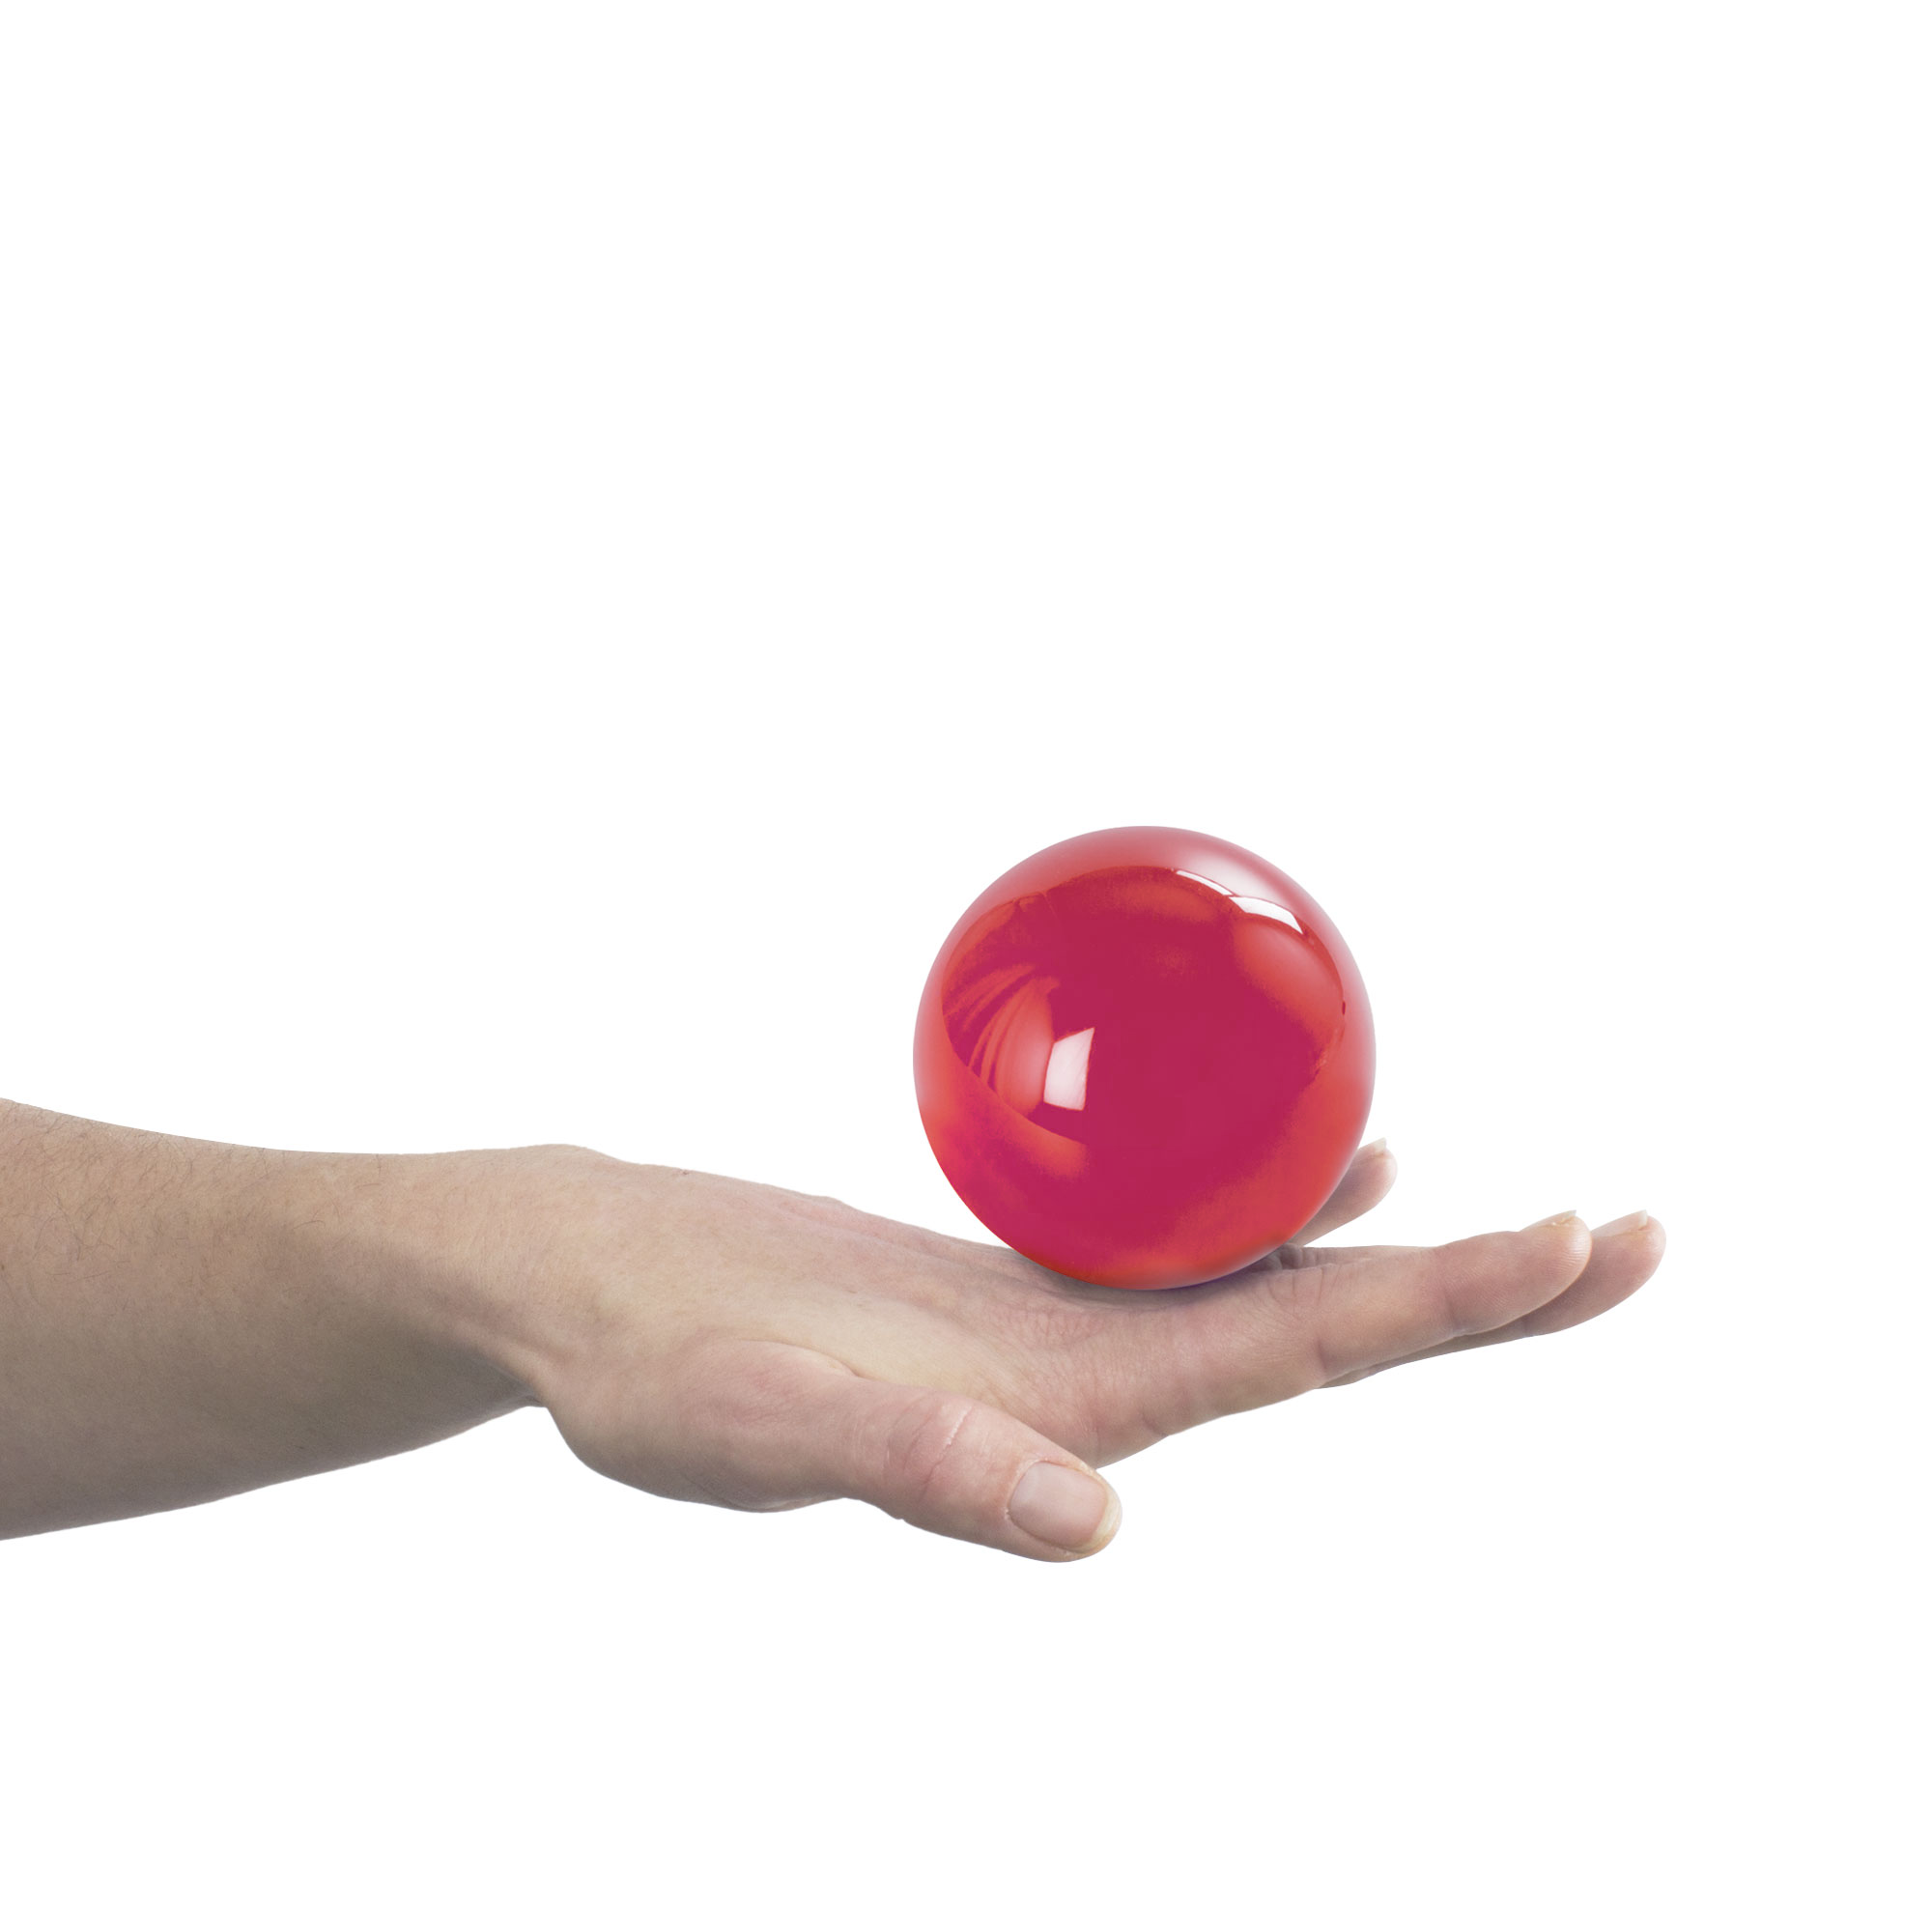 75mm red contact ball balanced on hand